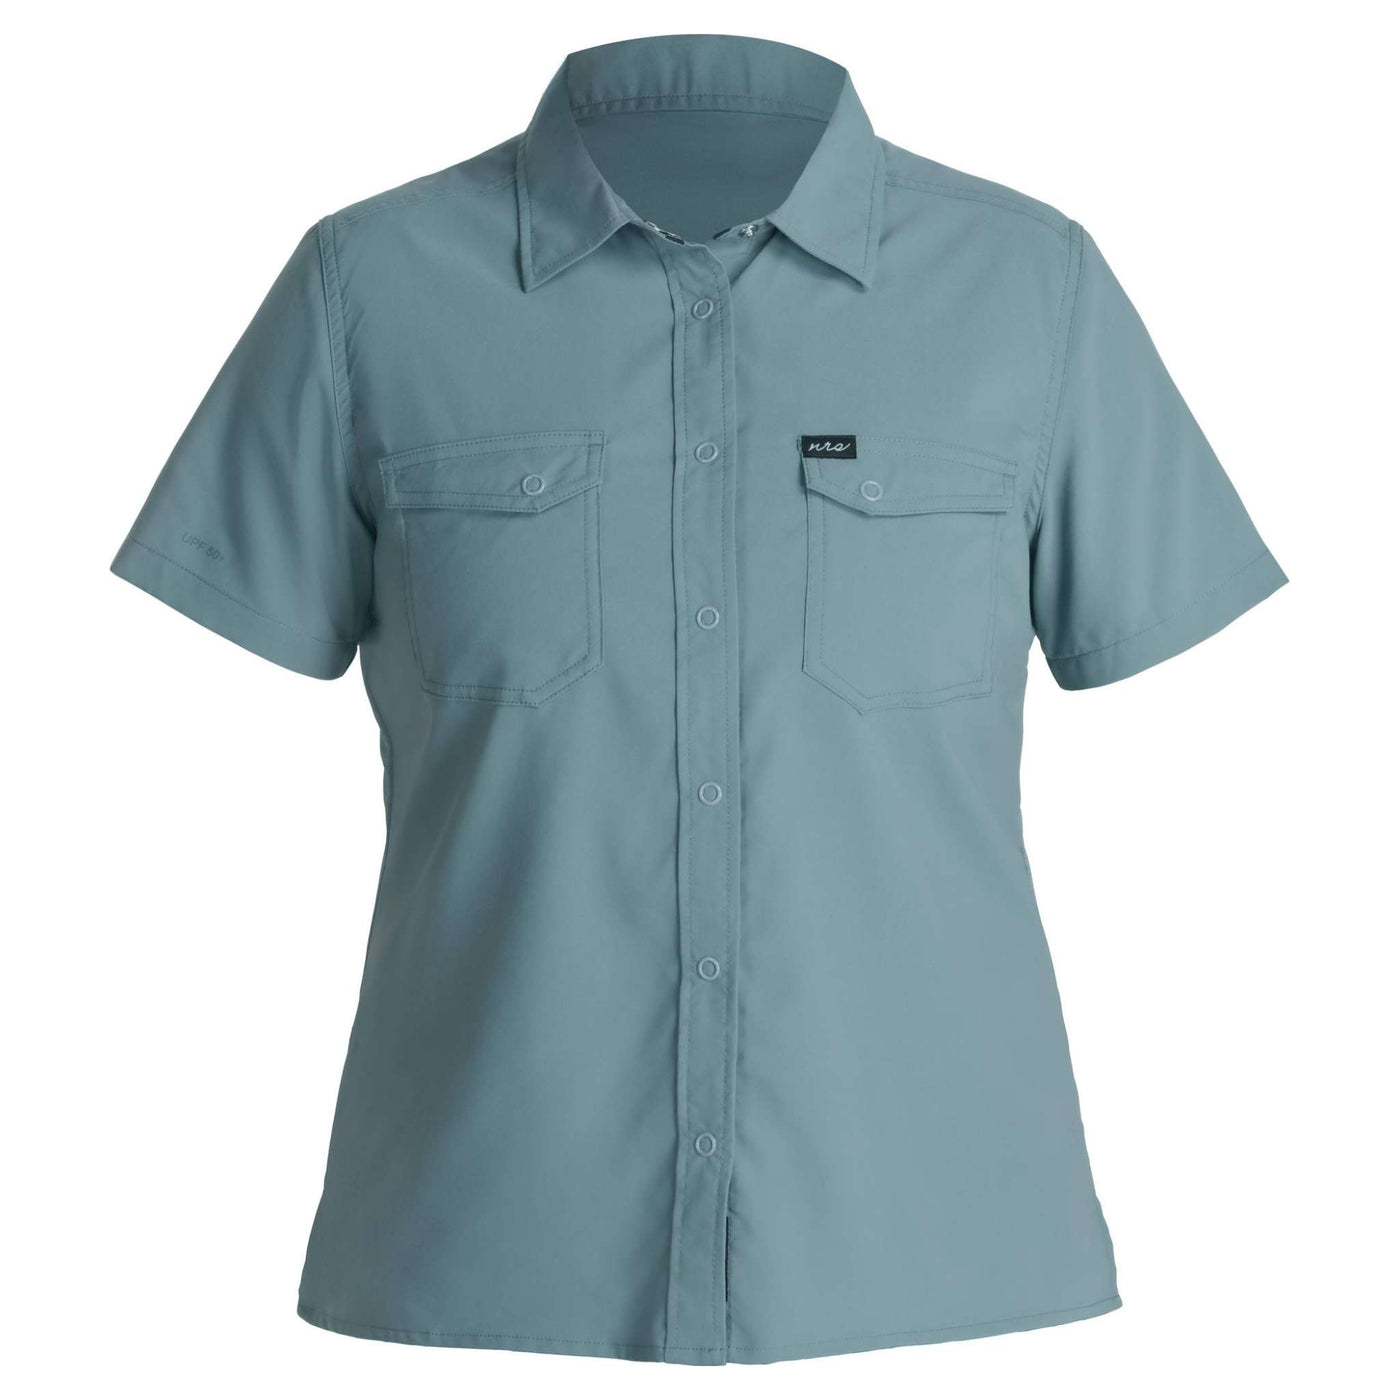 NRS Womens Short-Sleeve Guide Shirt | Womens Paddle Clothing | Further Faster Christchurch NZ #lead